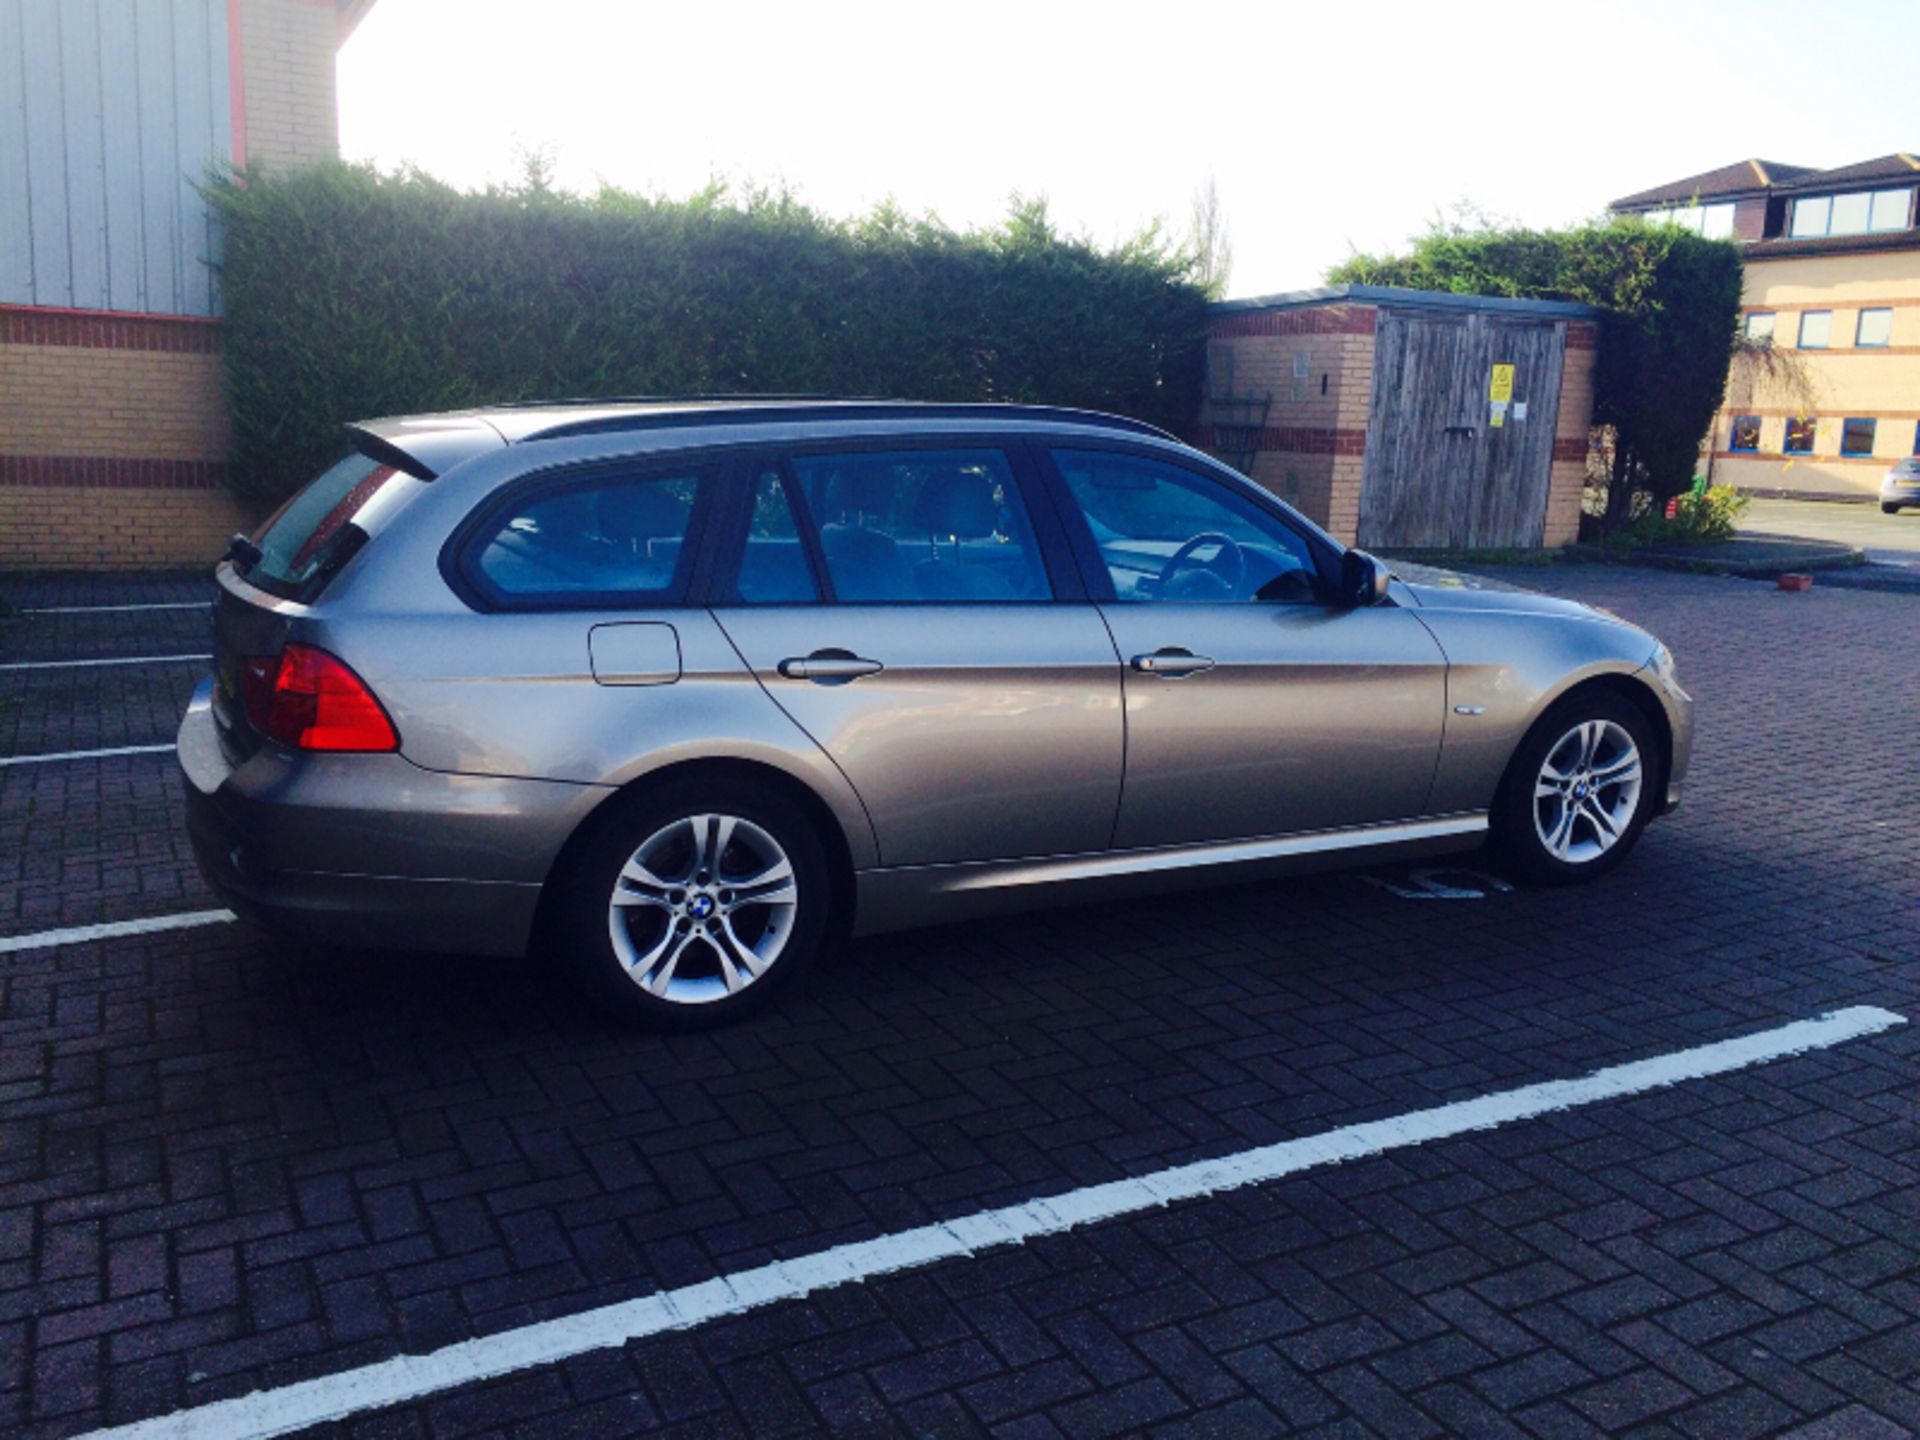 ON SALE ! BMW 318D DIESEL (2011 - 11 REG) 'SERVICE HISTORY BY BMW' START / STOP - AIR CON - EURO 5 - Image 3 of 15